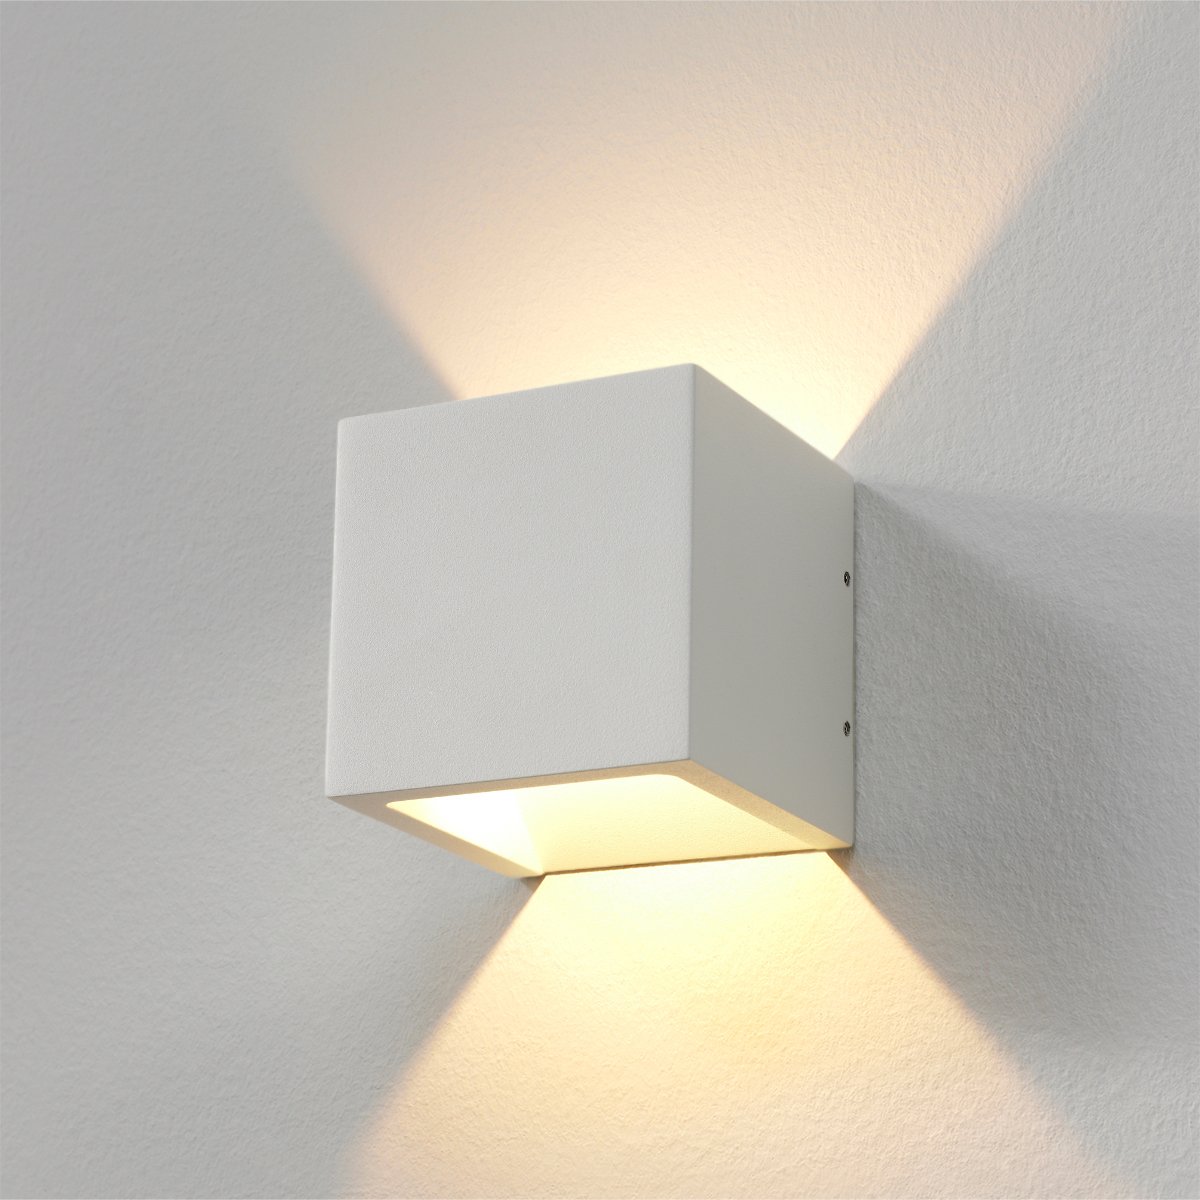 Wall lamp Cube up down white Torno - 10 cm